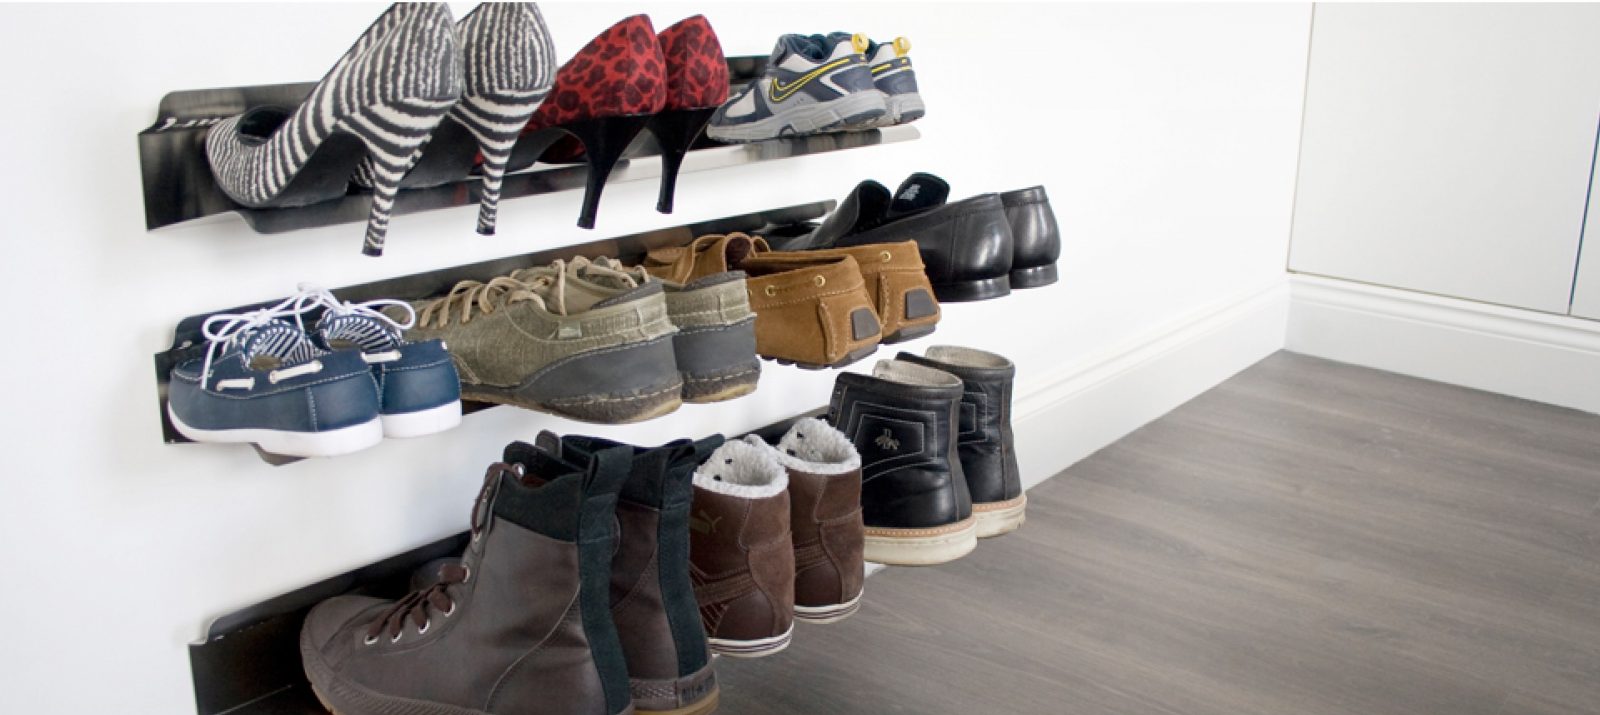 7 No-Fail Shoe Organization Methods to Keep Your Closets Tidy